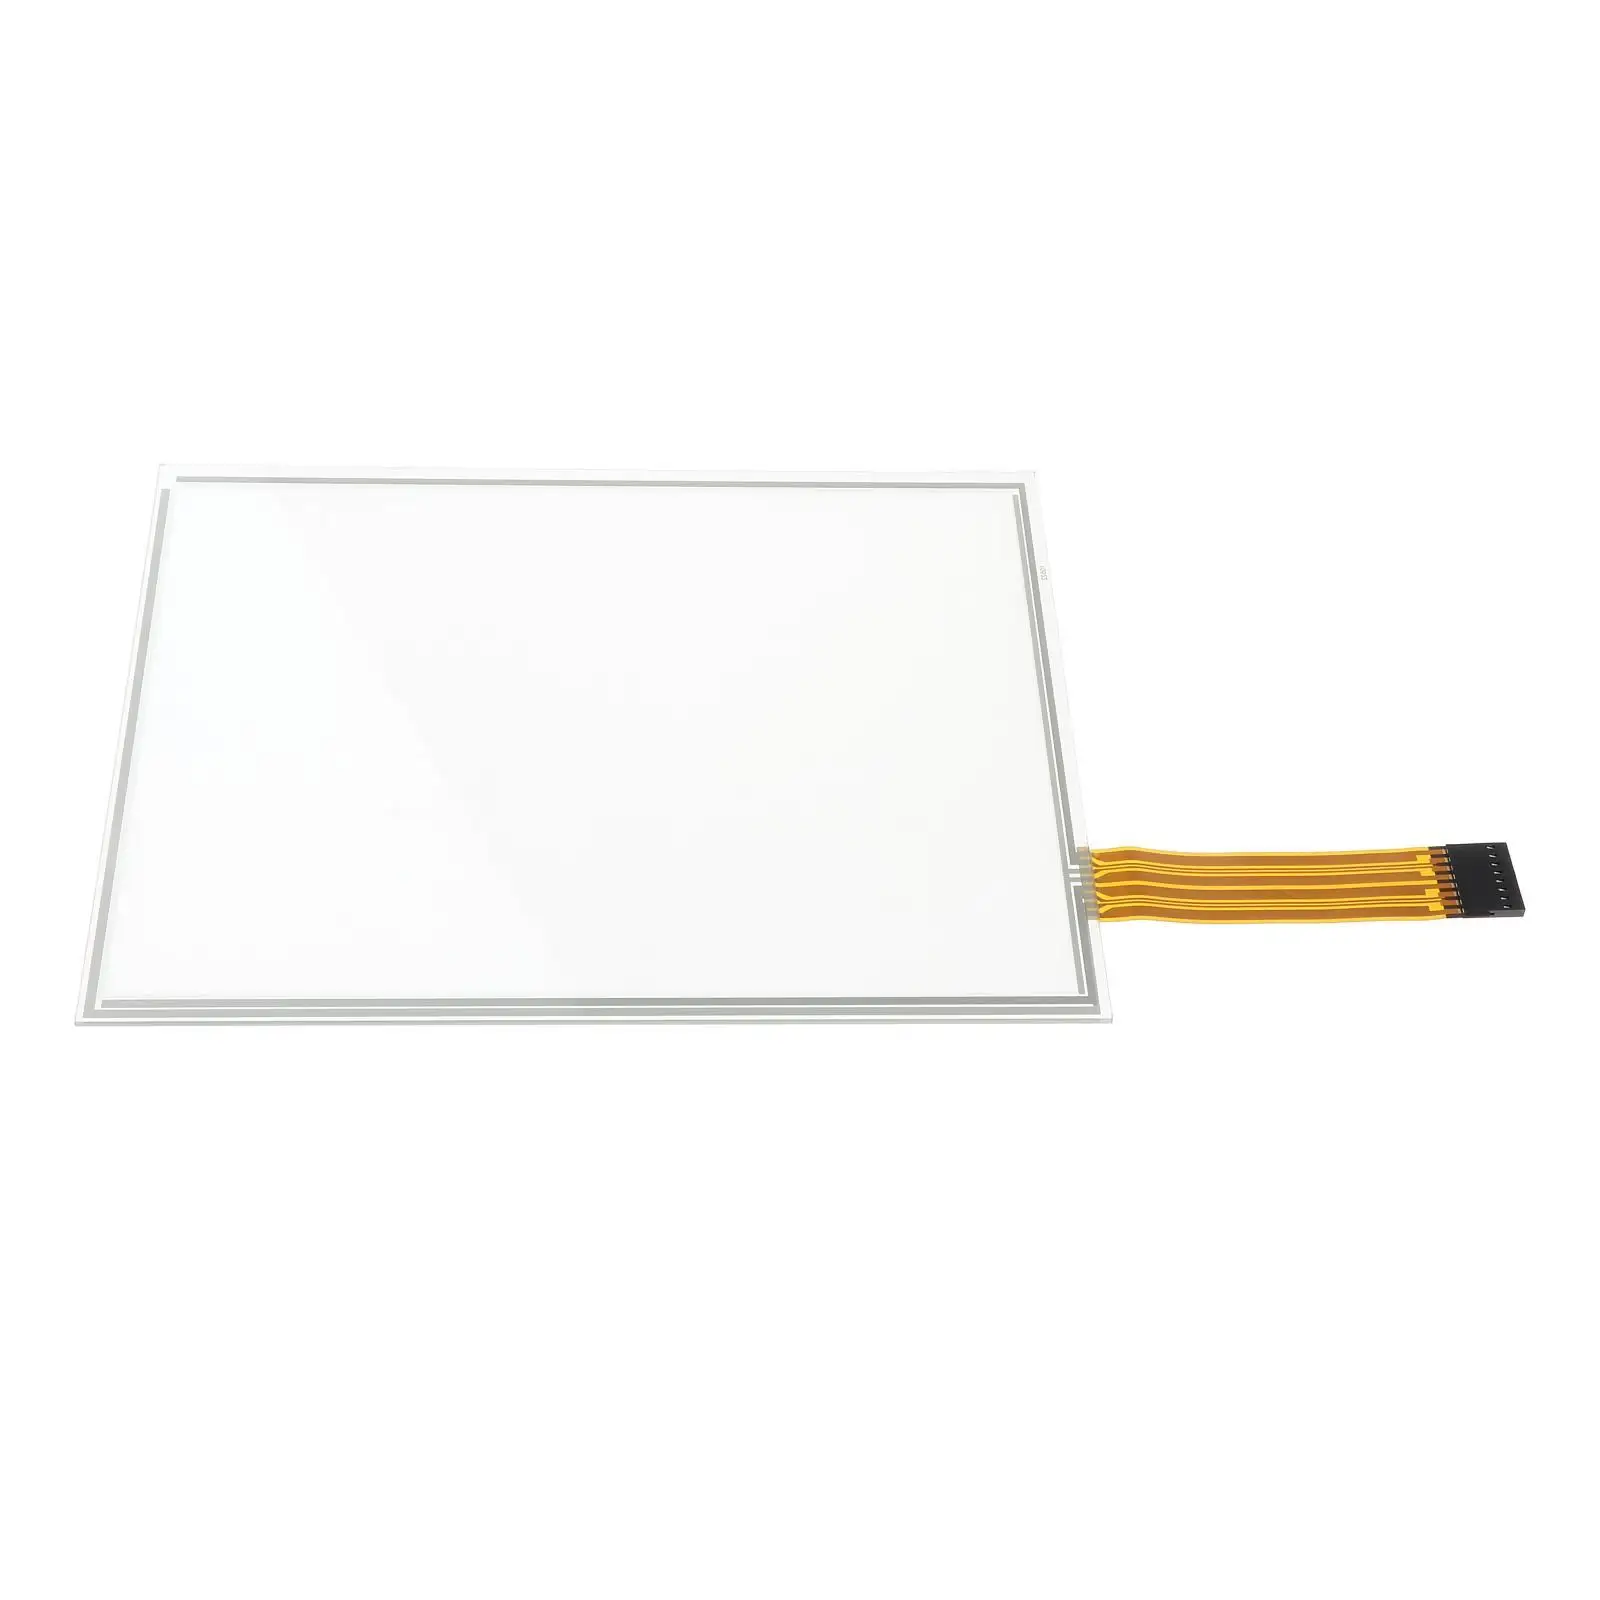 Touch Screen Digitizer PF80877 PG200402 PF81076 PF81185 10.4inch for Greenstar GS2 2600 Computer Display Stable Performance